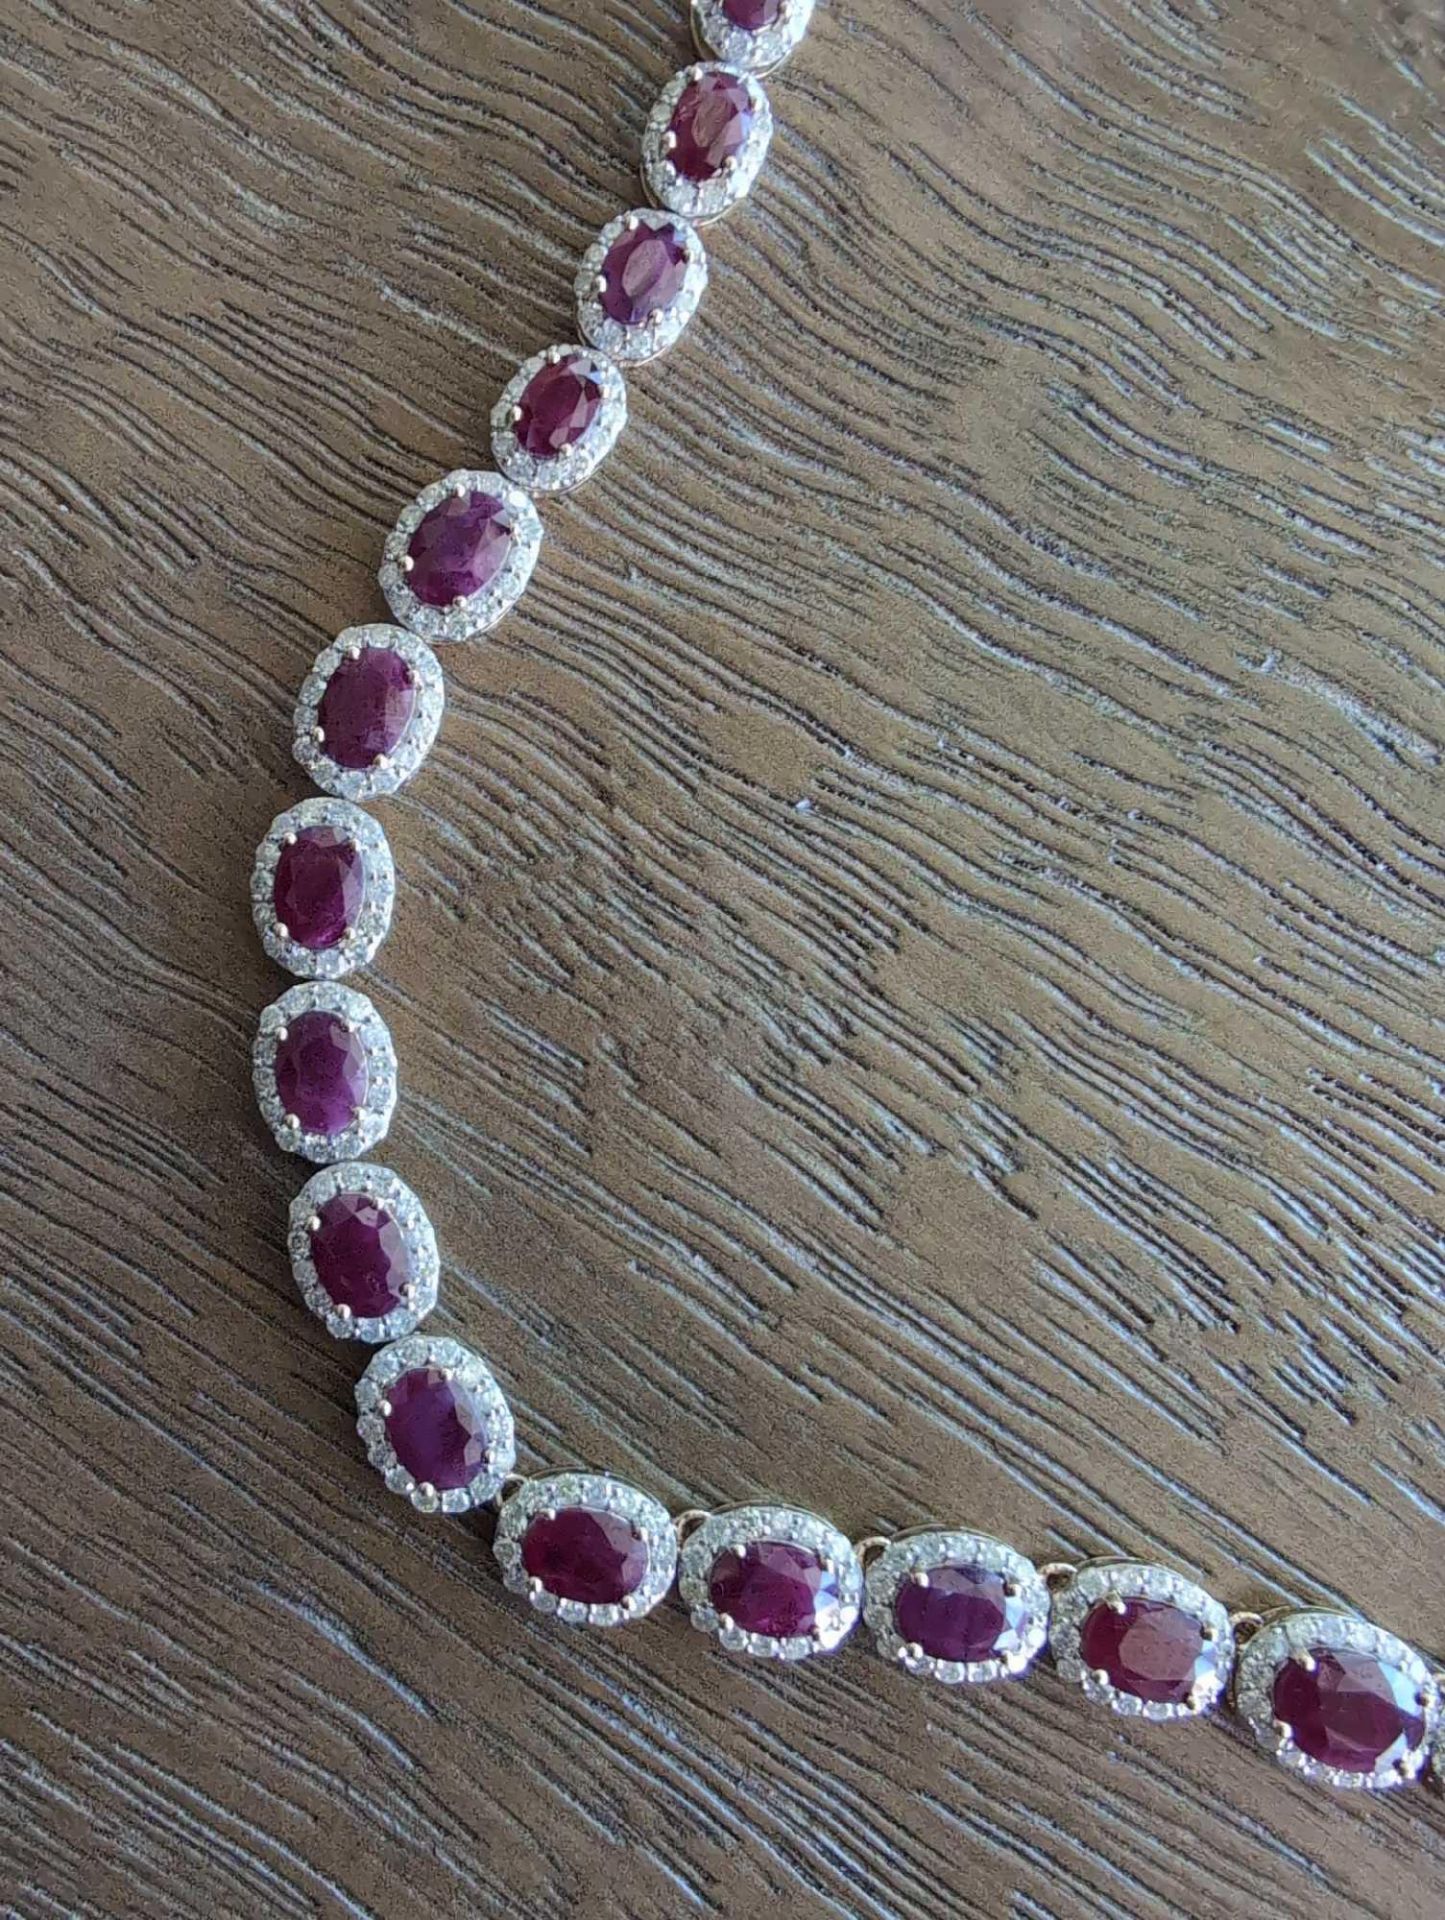 14KT Gold Ruby and Diamond Necklace - Image 3 of 12